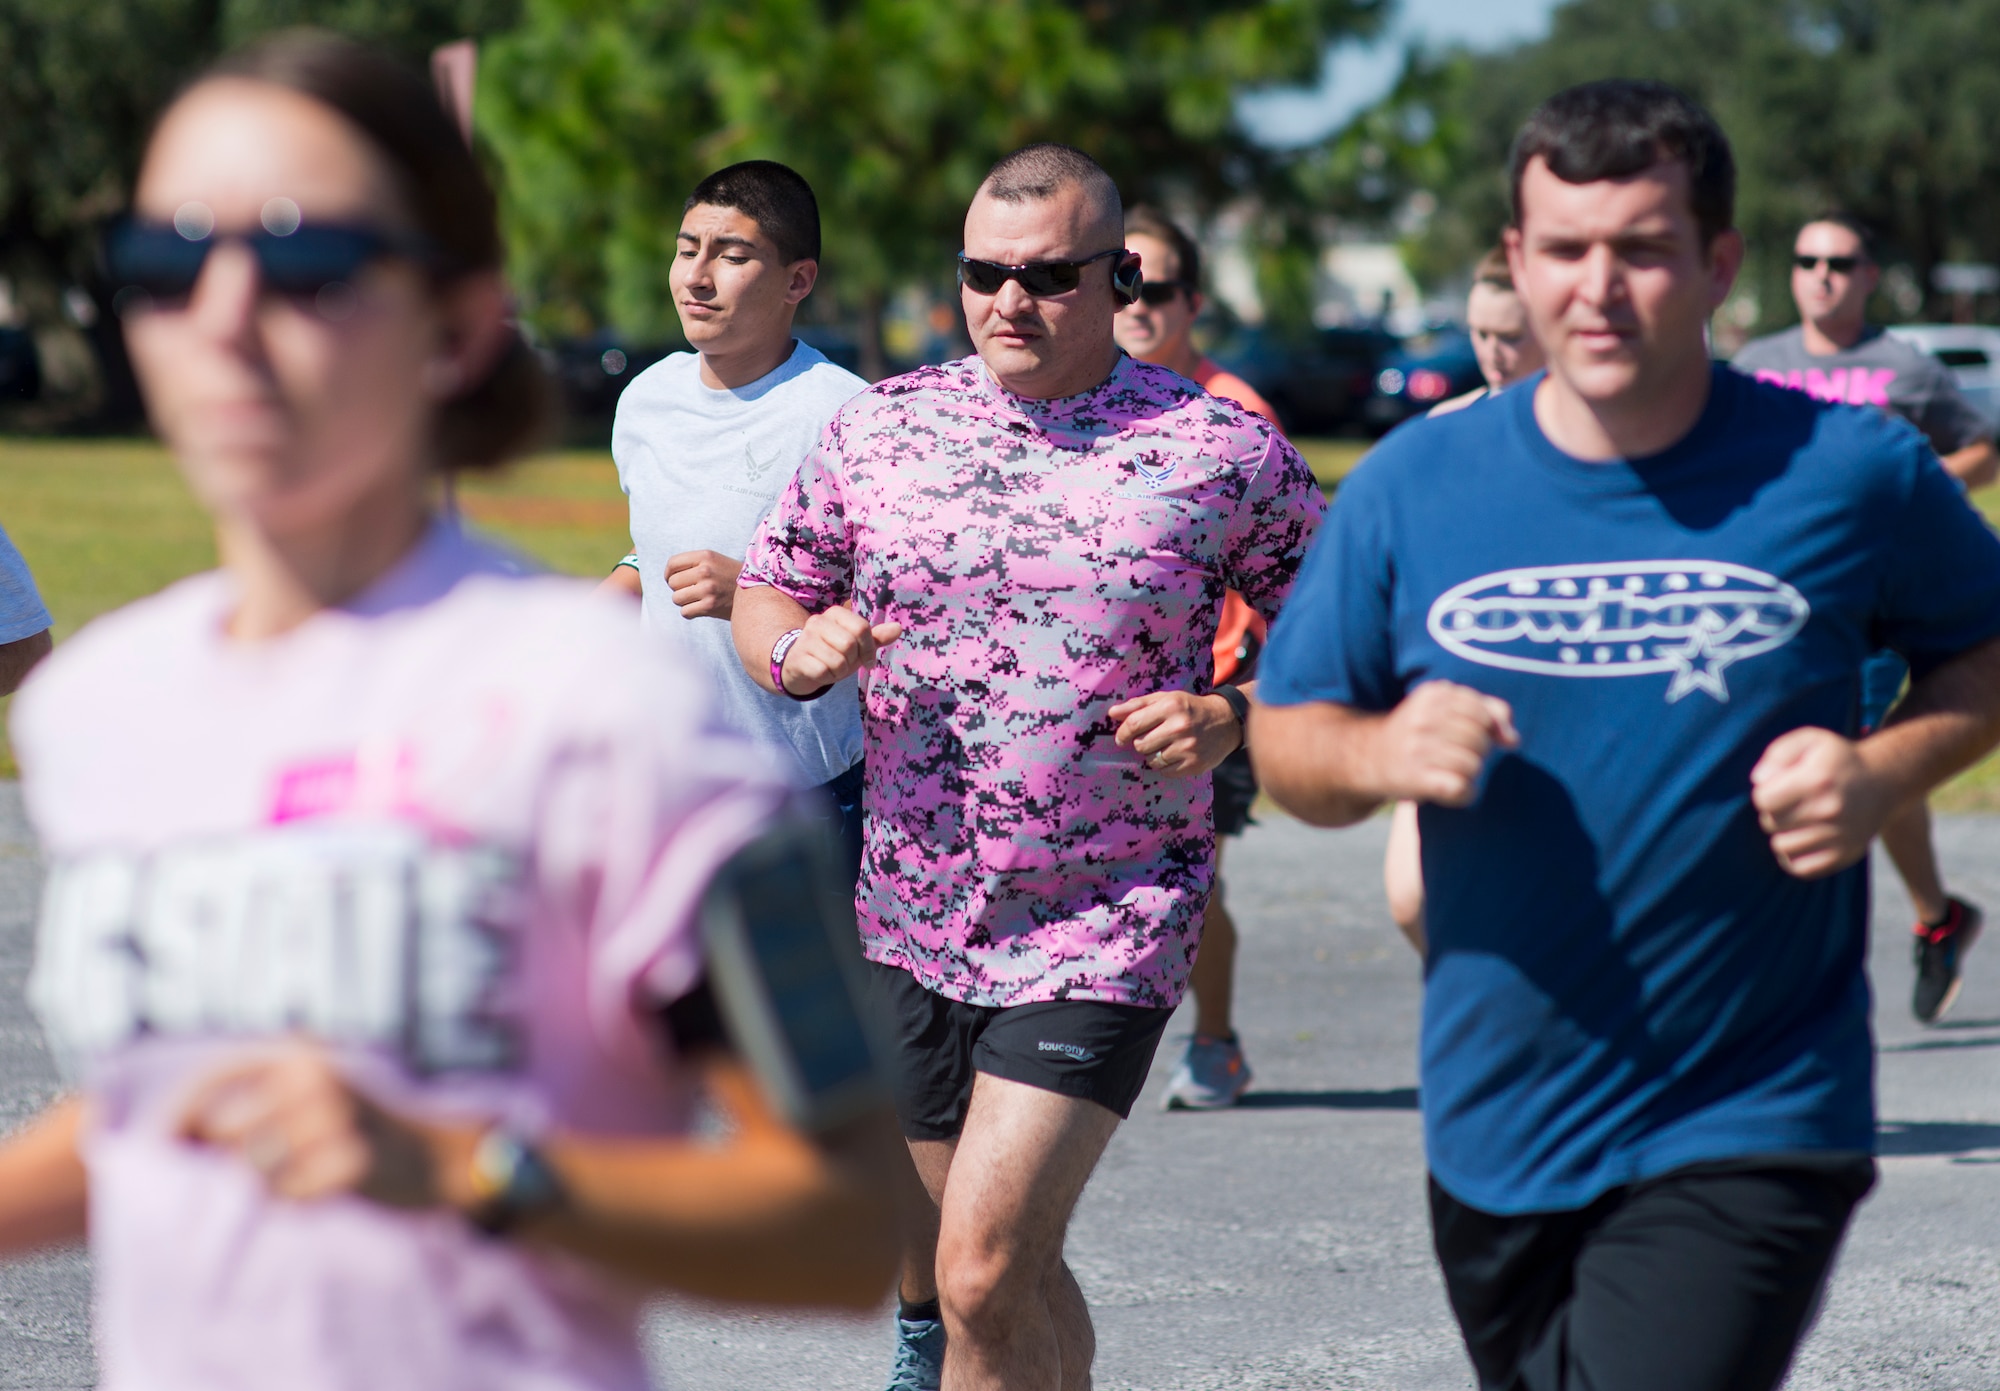 A runner wears an Air Force pink camo t-shirt to support the Eighth Annual Breast Cancer Awareness 5k run Oct. 17 at Eglin Air Force Base, Fla.  Eglin's health promotion flight was also on hand providing information on breast cancer risk factors, symptoms and screenings. The event was held to promote breast cancer awareness and the importance of self-examination to catch the disease in its early stages. More than 200 supporters came out to run.  (U.S. Air Force photo/Samuel King Jr.)